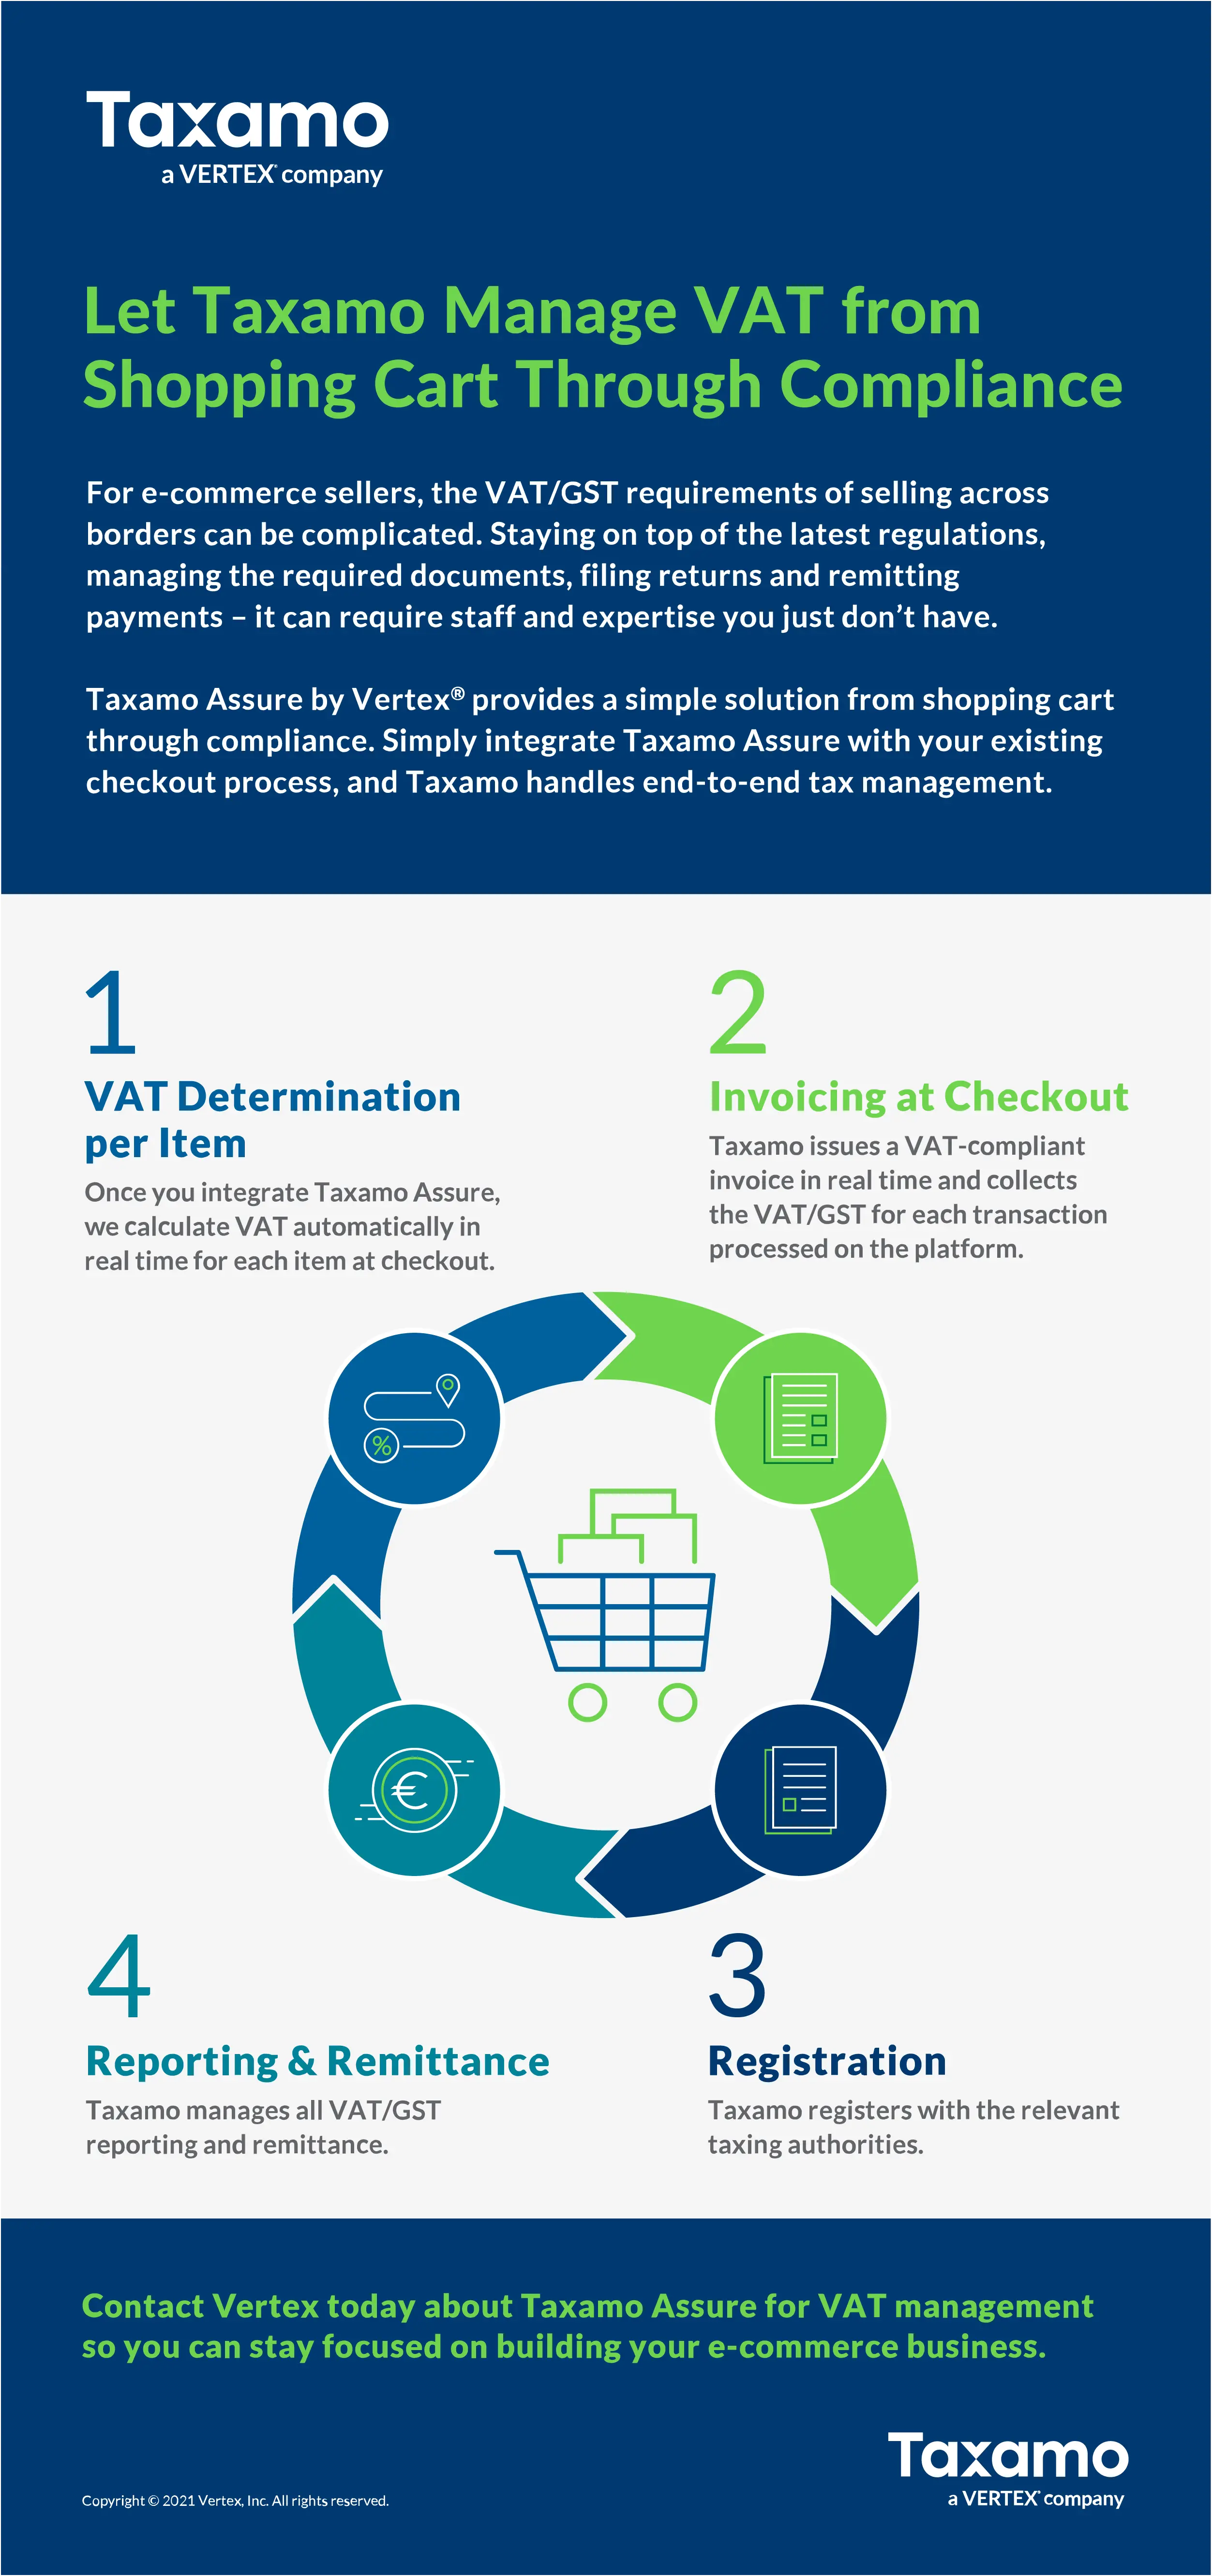 Infographic outlining the 4 ways that Vertex Taxamo can help businesses manage VAT from shopping cart through compliance.